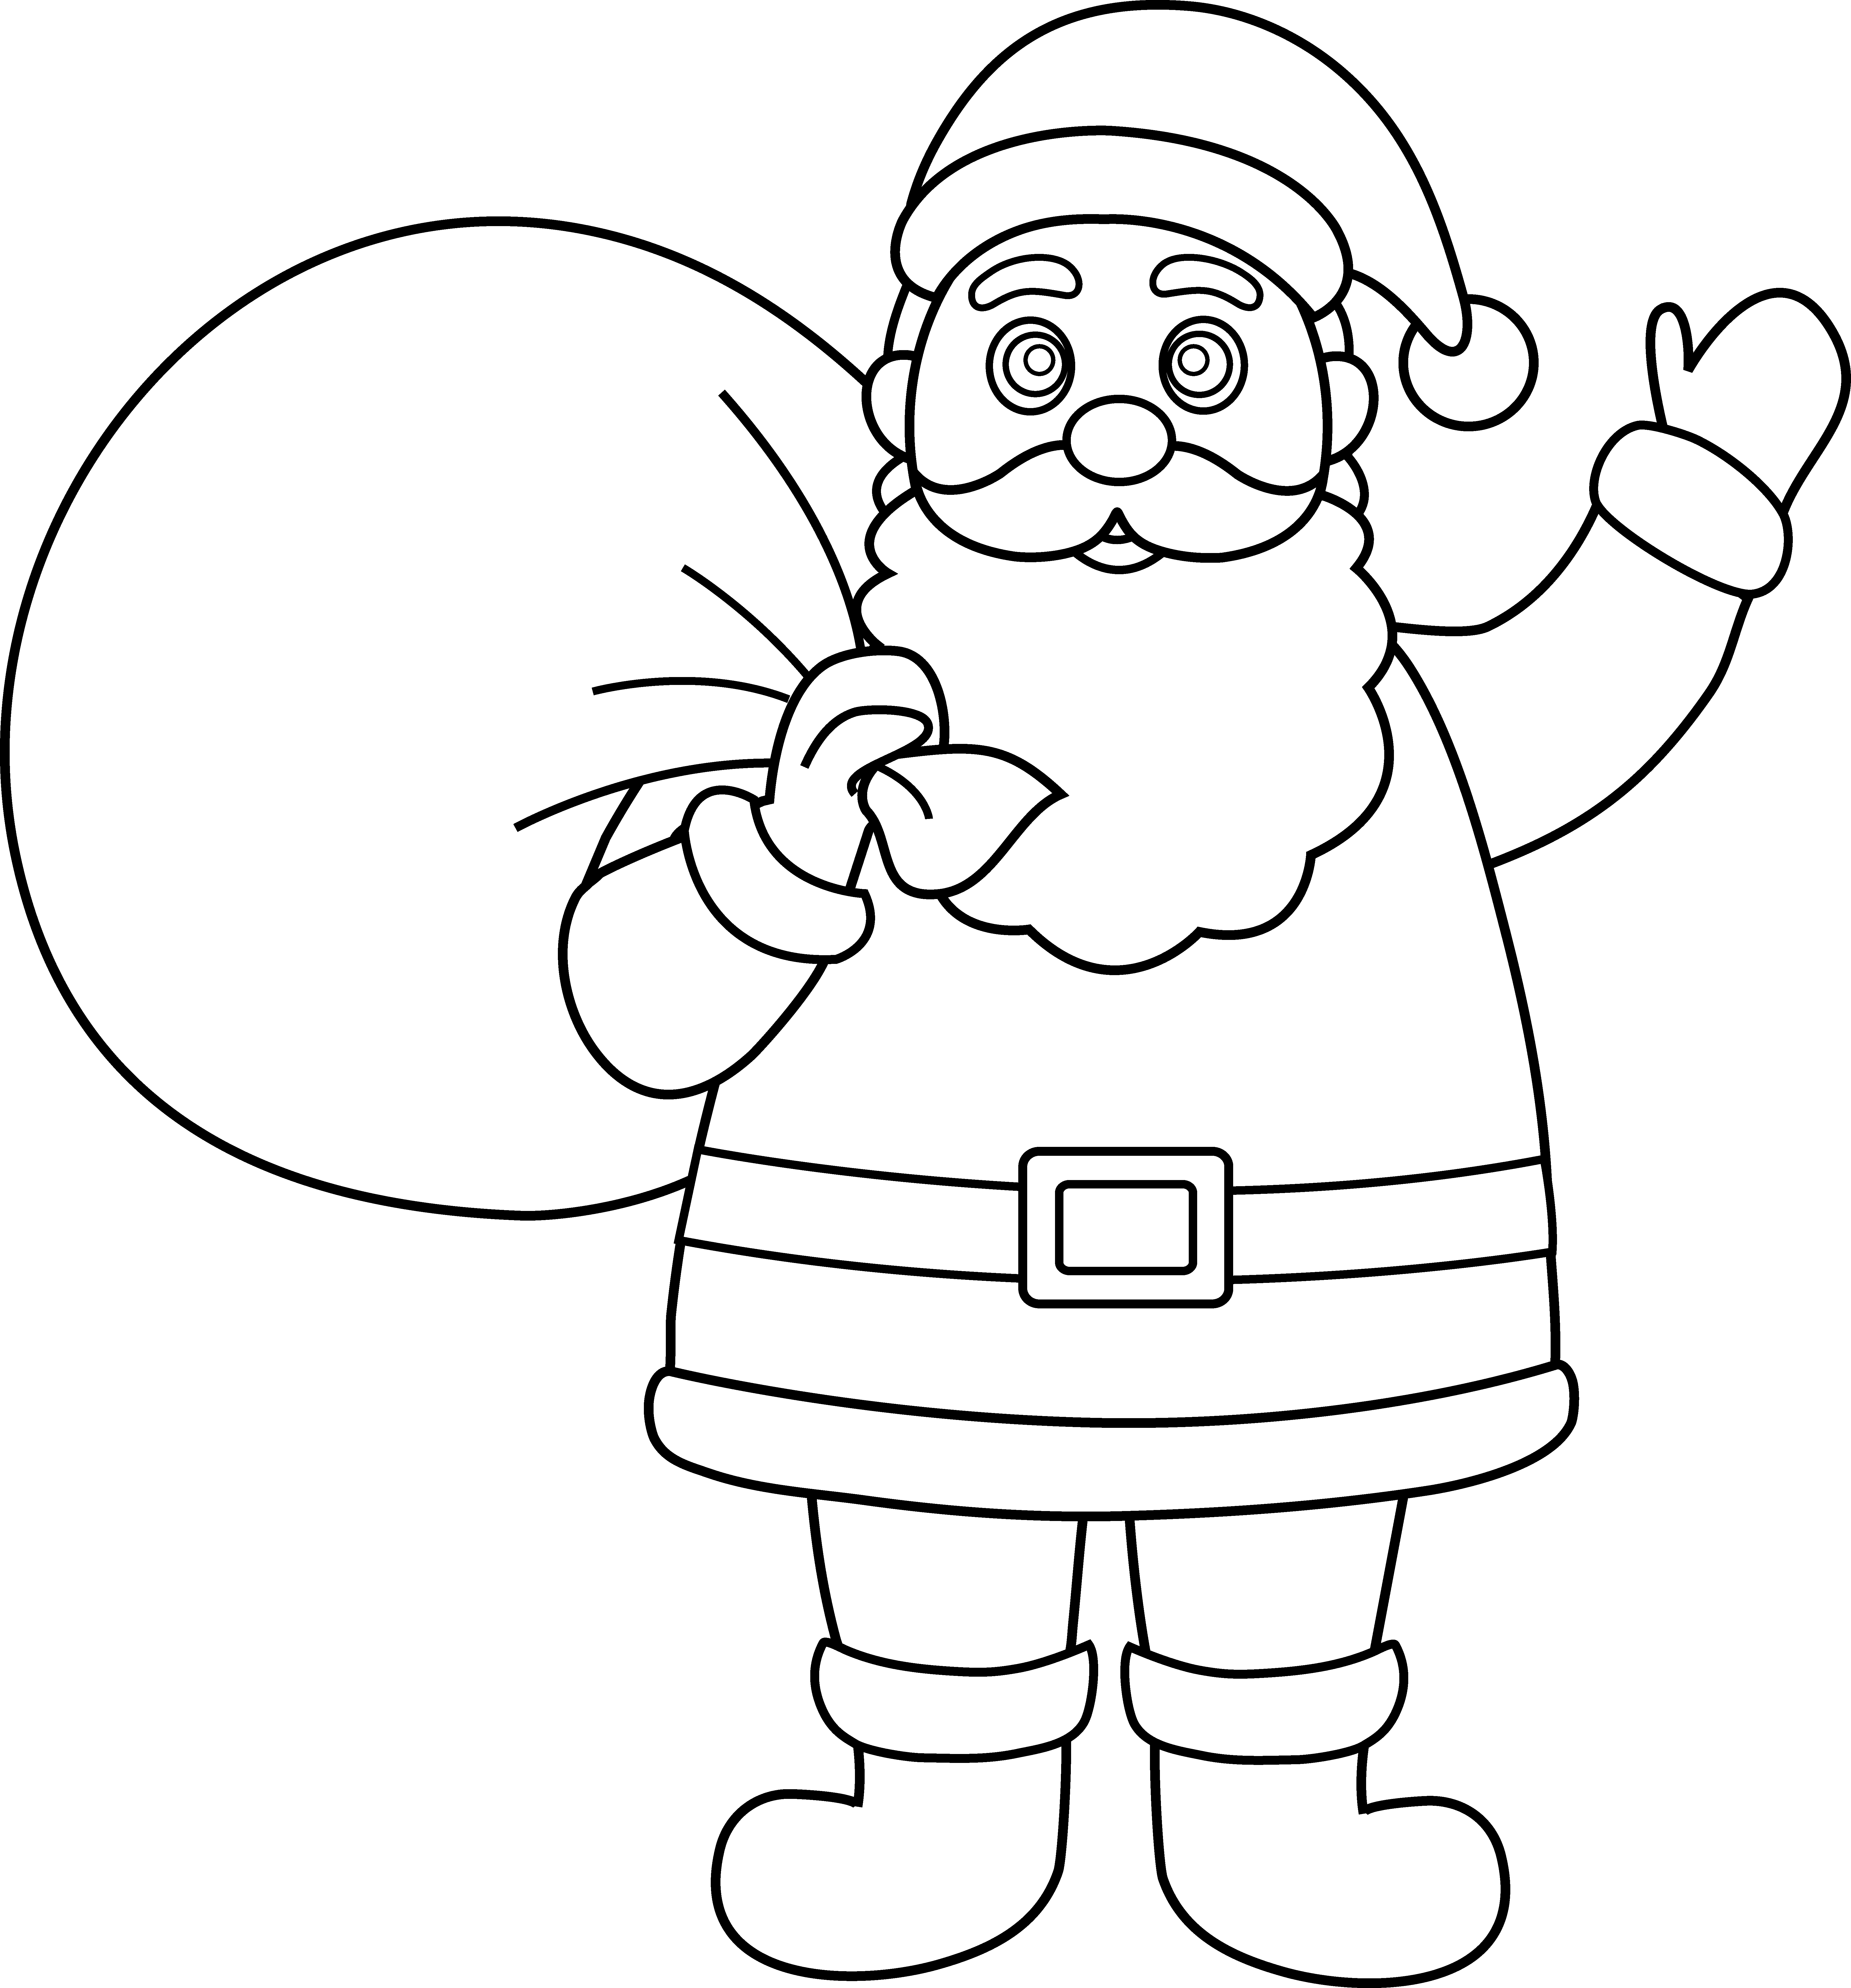 Free Pictures Of Black Santa Claus, Download Free Clip Art, Free Clip